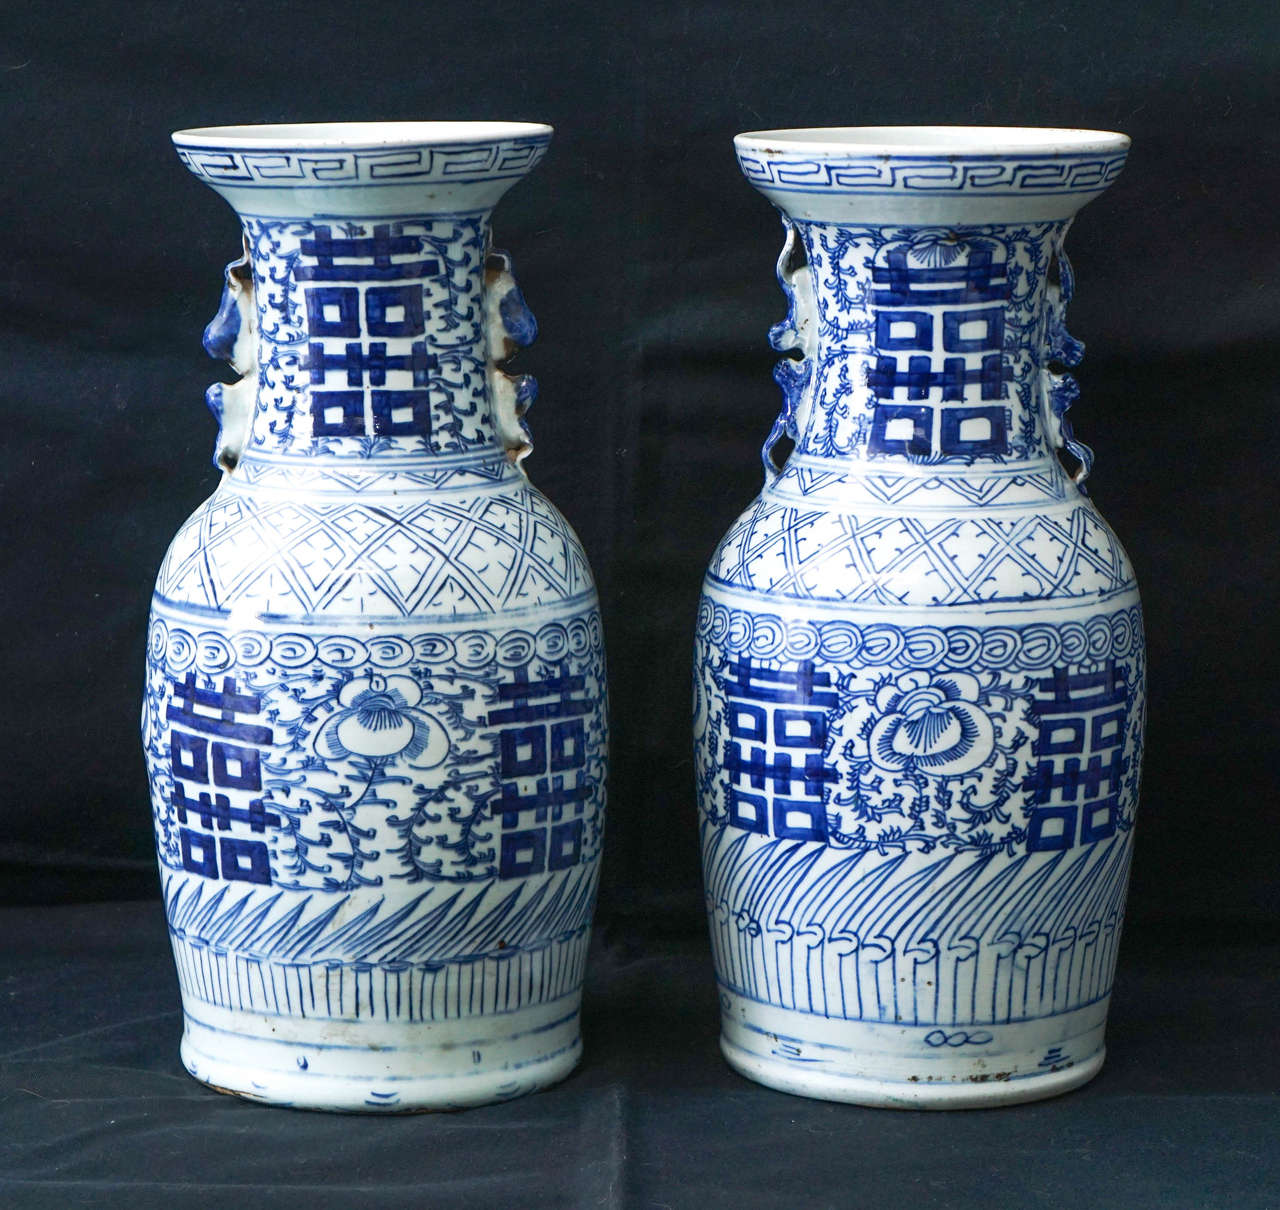 This pair of blue and white Chinese porcelain vases were made for export to the west. Created as an economic commodity they represented standard Chinese themes but formatted and shipped to the west creating an instant exotic element in Victorian